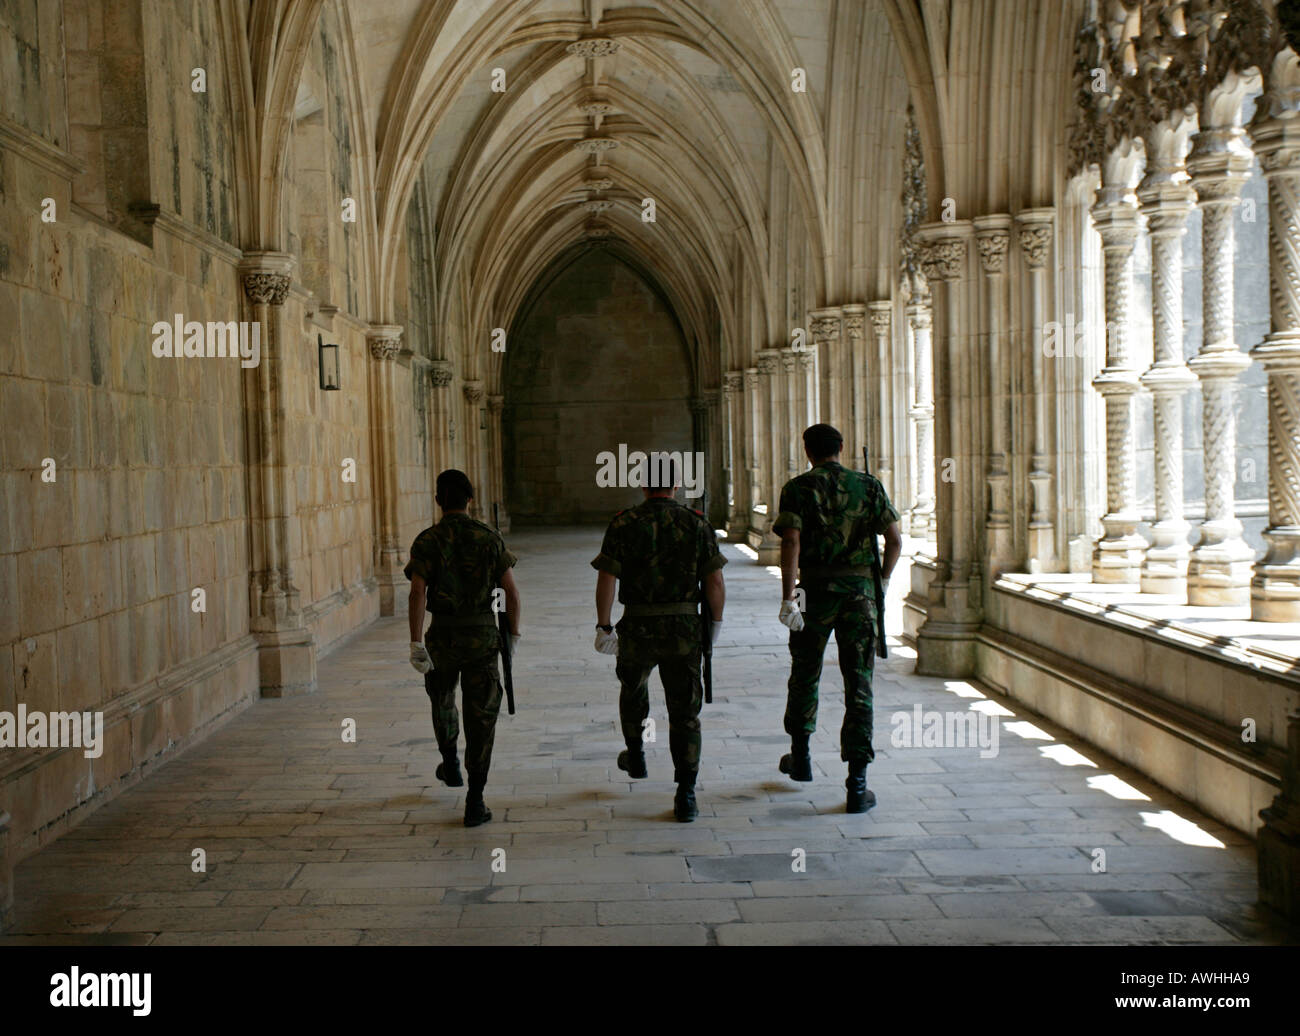 An honor guard of soldiers march in the tomb of the unknown soldier at the ornate monastery at Batalha Portugal. Stock Photo